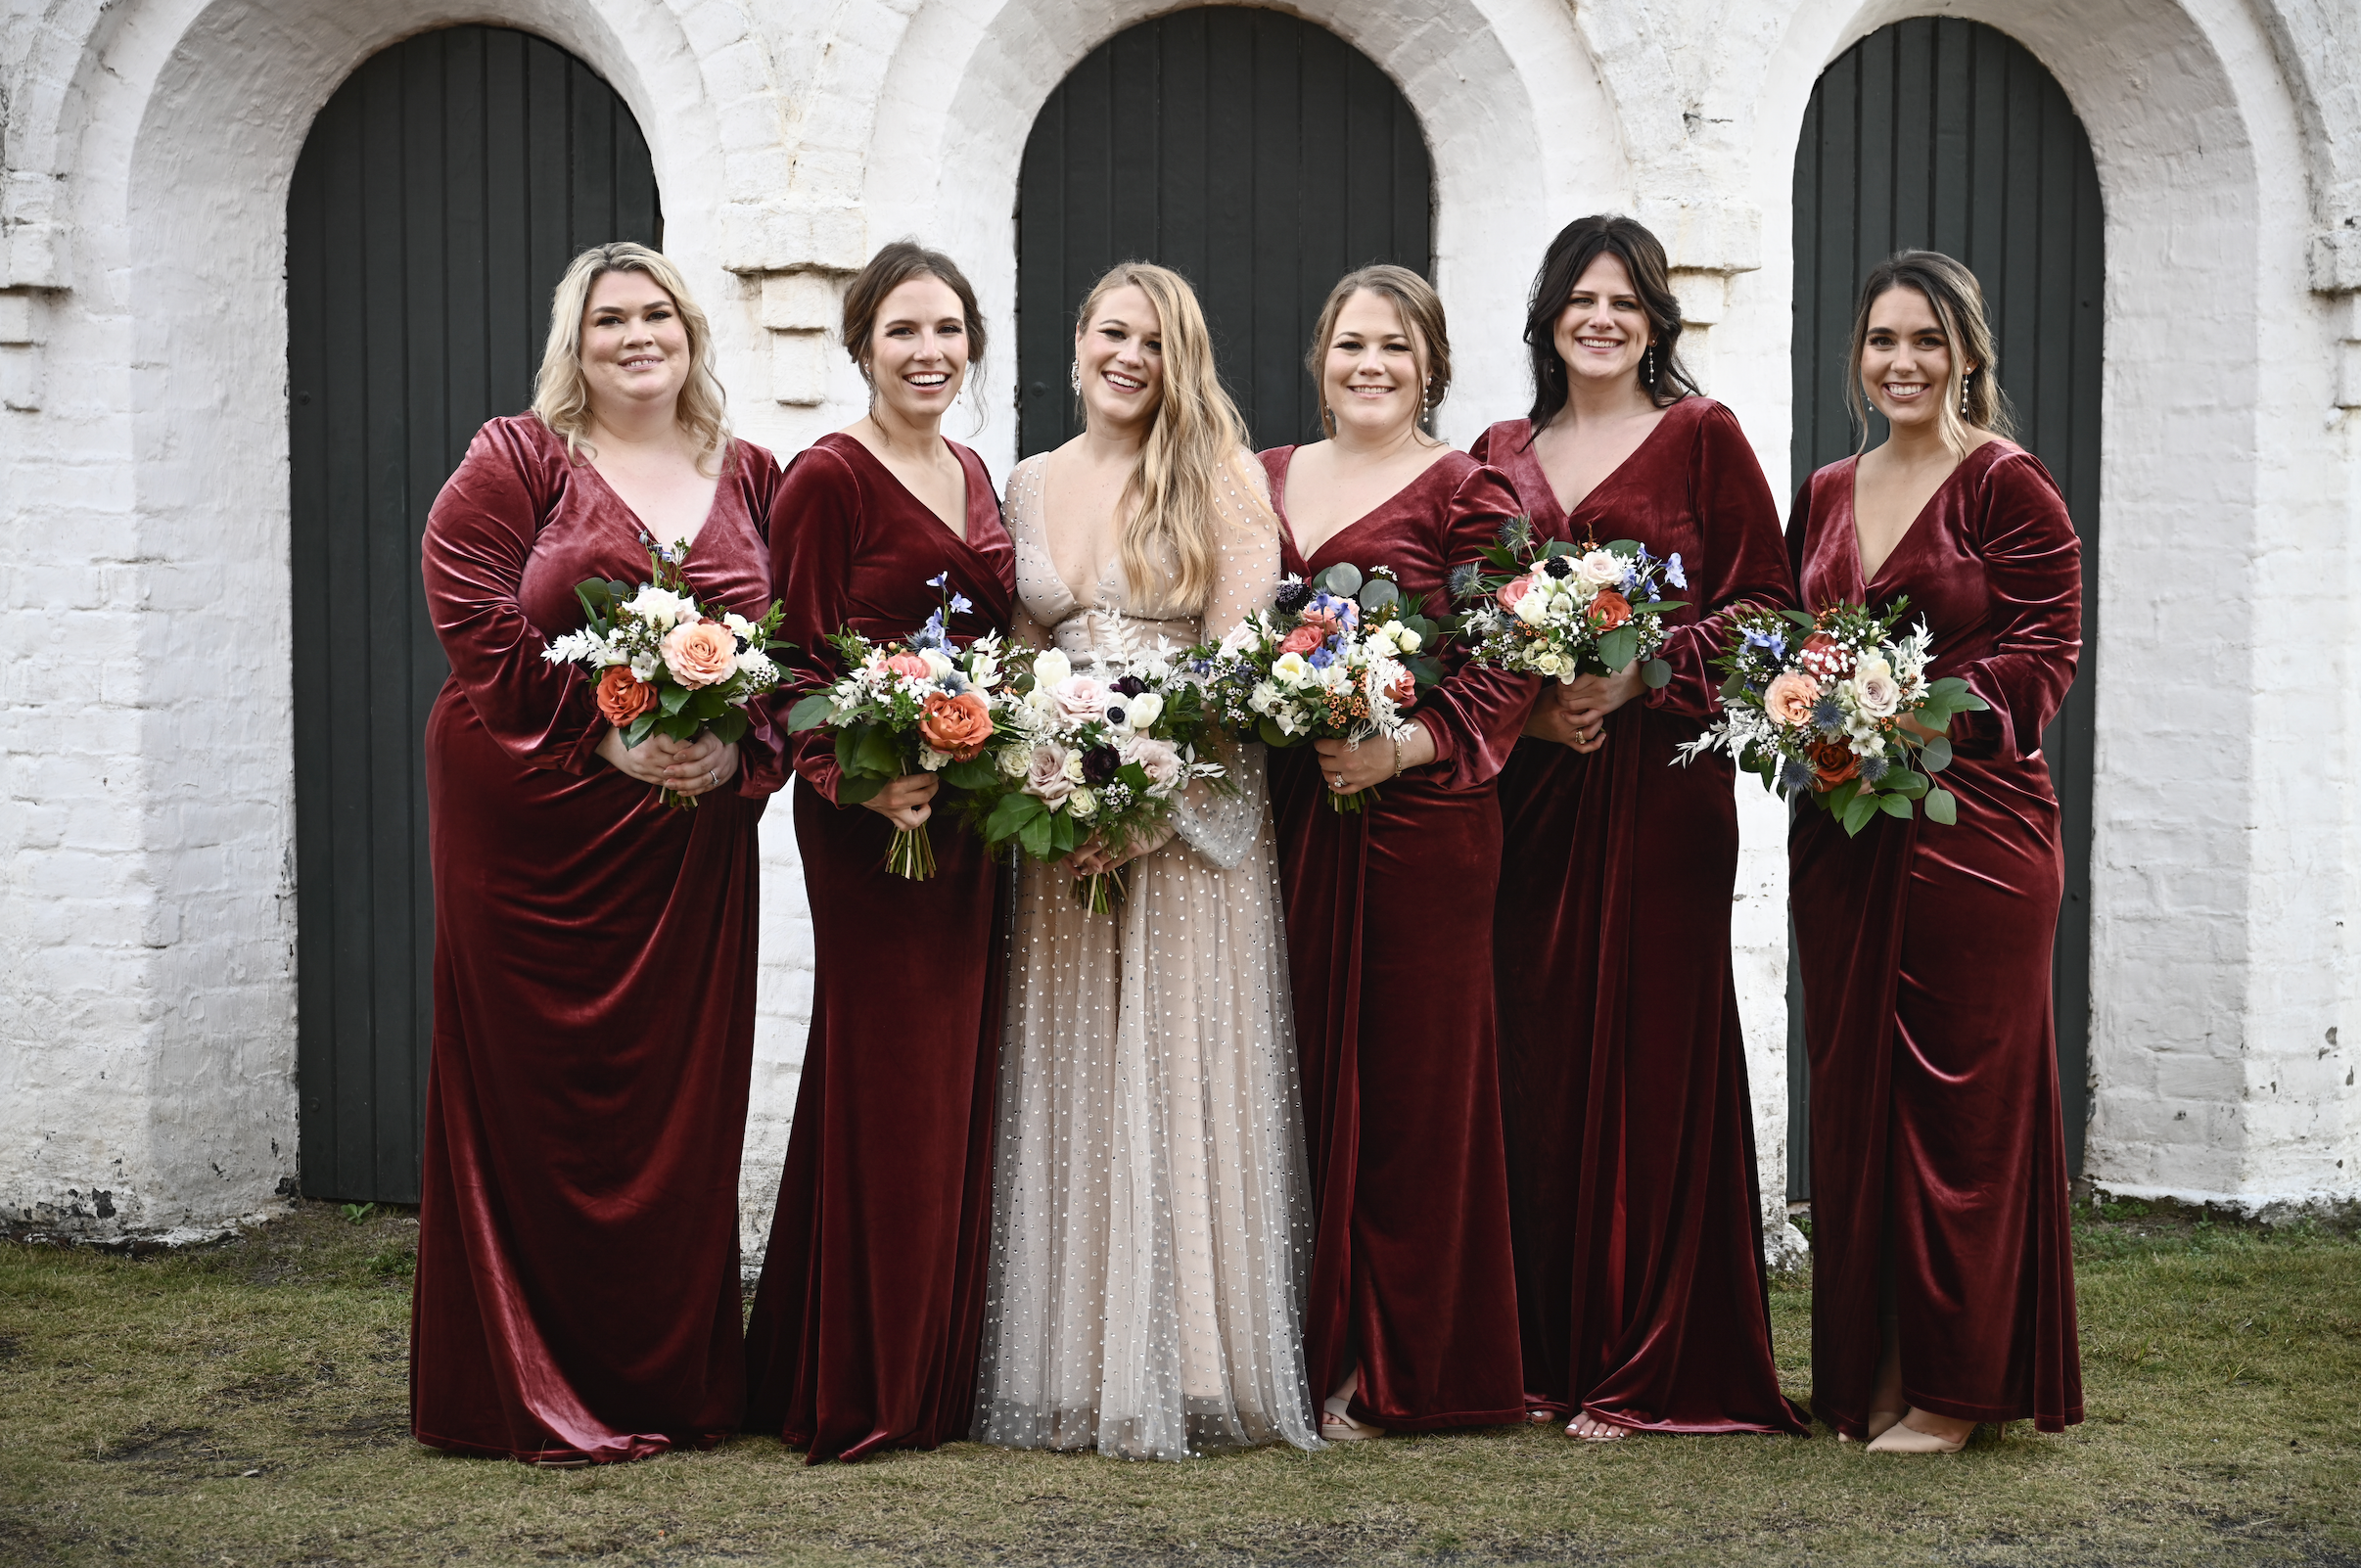 mckenna-and-isaacs-romantic-vintage-inspired-savannah-wedding-at-the-georgia-state-railroad-museum-planned-by-savannah-wedding-planner-ivory-and-beau-savannah-wedding-coordinator-georgia-wedding-planner-destination-wedding-planner-5.png